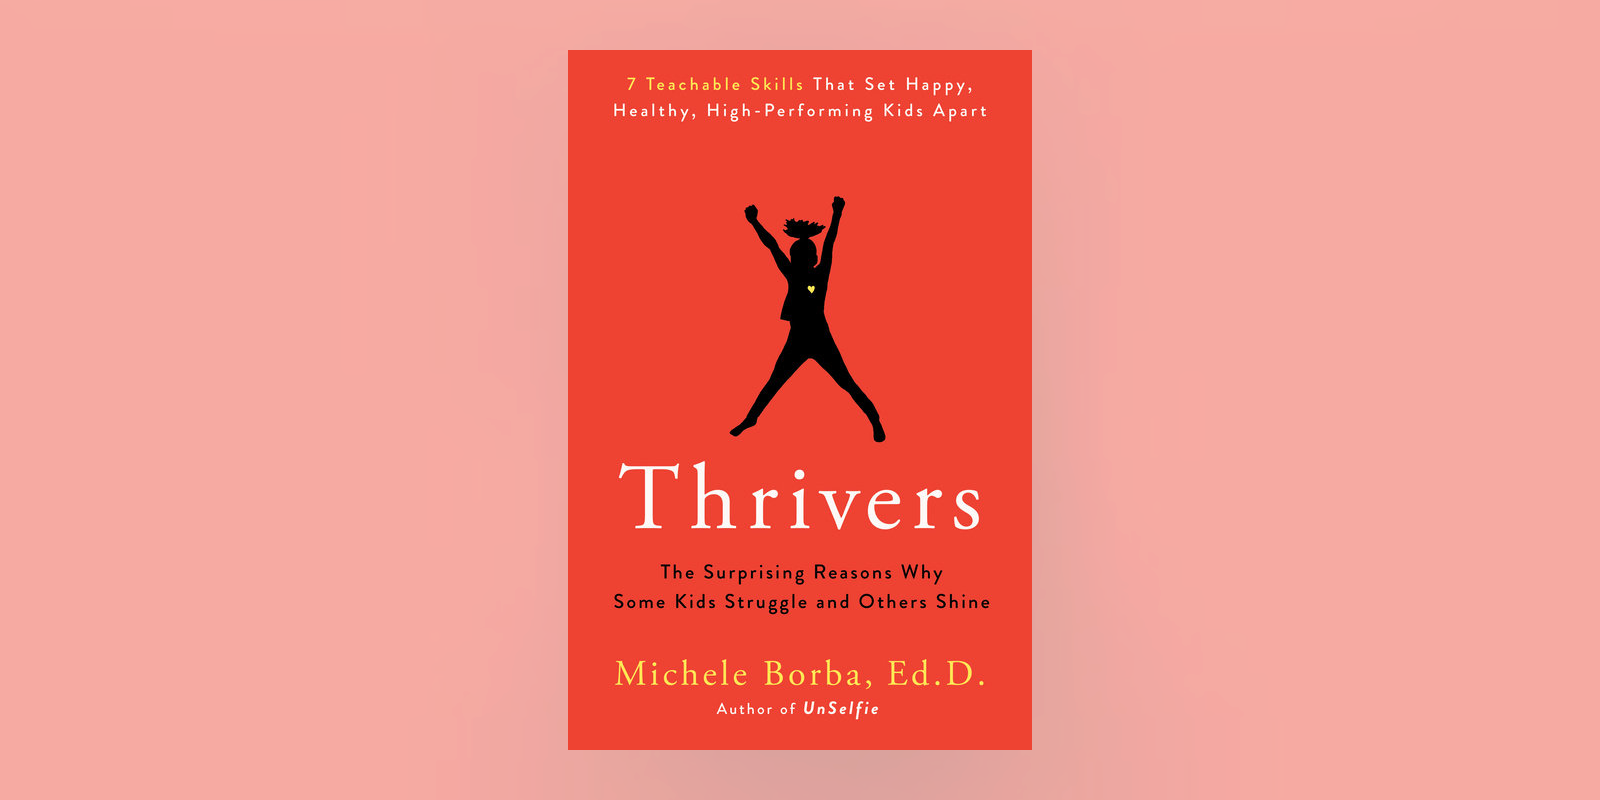 In <i>Thrivers</i>, Michele Borba, Ed. D. explains why some kids thrive while others strive